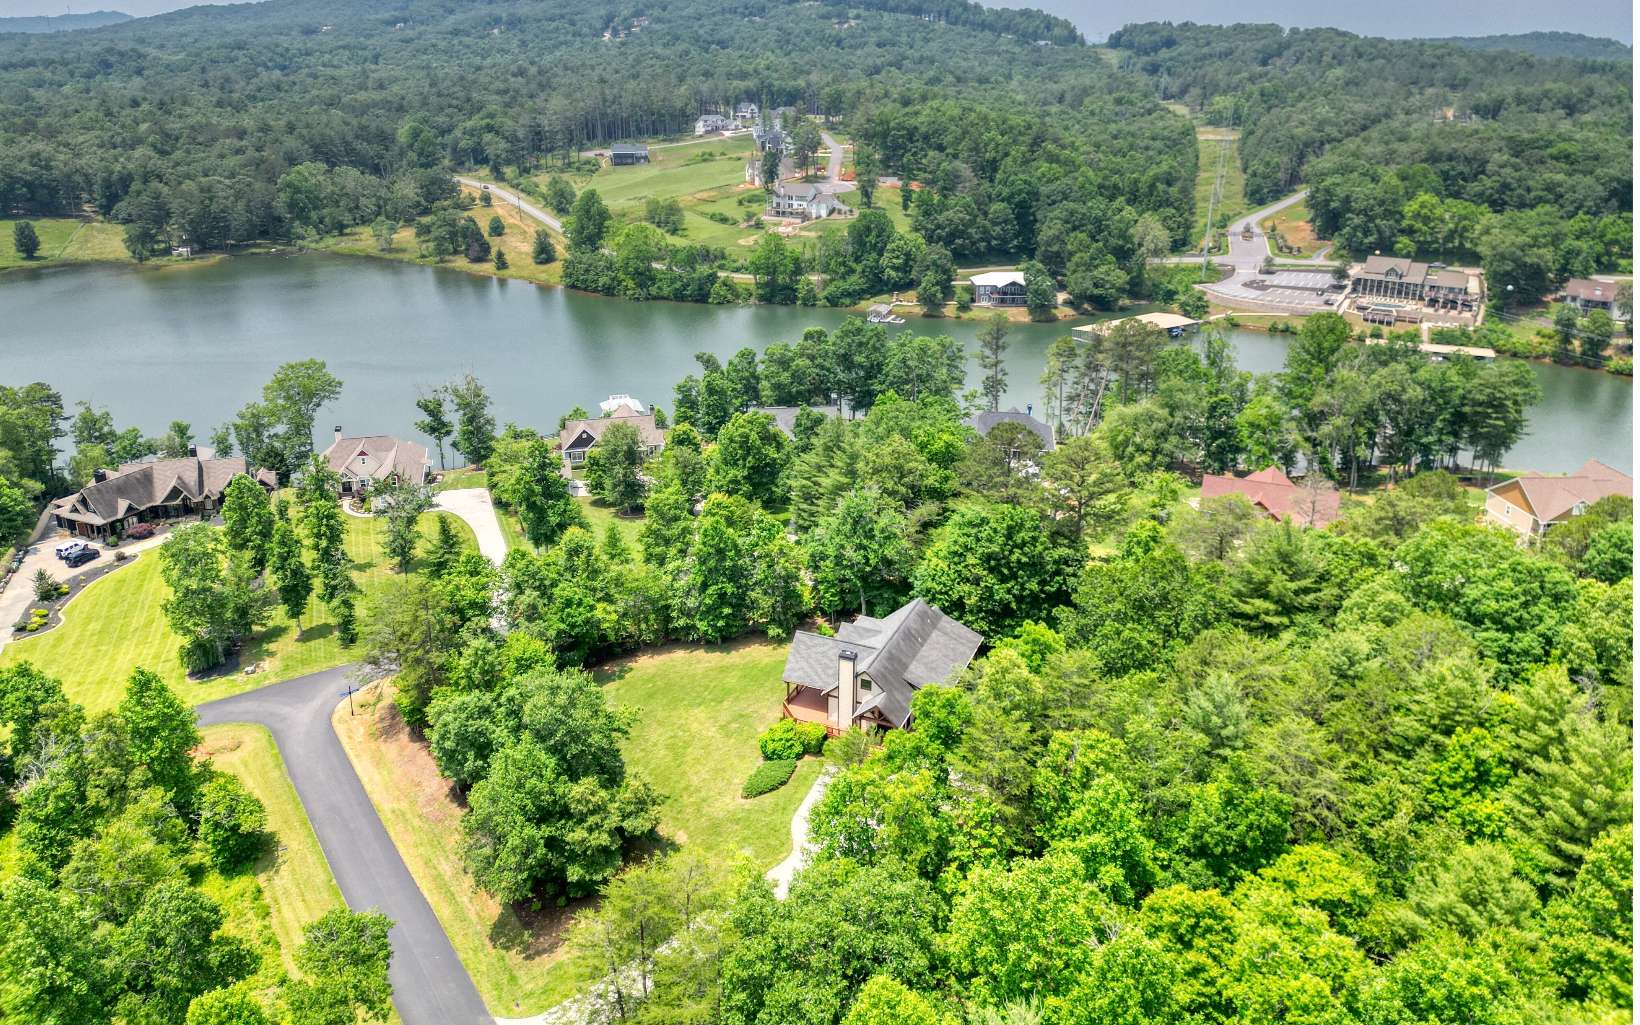 Bring your boat & start your new adventure in this tremendous 4 BR, 3 bath custom home in Tallulah Landing gated comm. w/ private marina/boat ramp & pavilion. BIG corner lot on .93 acres w/ Hardiplank concrete siding & seasonal views of Lake Nottely (across the street) & surrounding mountains. Huge great room w/ vaulted wood ceilings & stacked stone gas fireplace. Main level has oak floors, gas range & heated tile floor in main bath. Primary BR & 2nd BR on main & 2 BR's on terrace level. The walk-out basement has a spacious rec/living room with a custom wet bar including beverage wine & coolers, kegerator & microwave. Smart home system for sound/ thermostats/select lights/security system. Garage is 30X24 w/ 100 amp service for additional living space. Located less than 2 miles from downtown Blairsville & Butternut Golf course it's has everything you'll need for vacation or full time living. Must see!